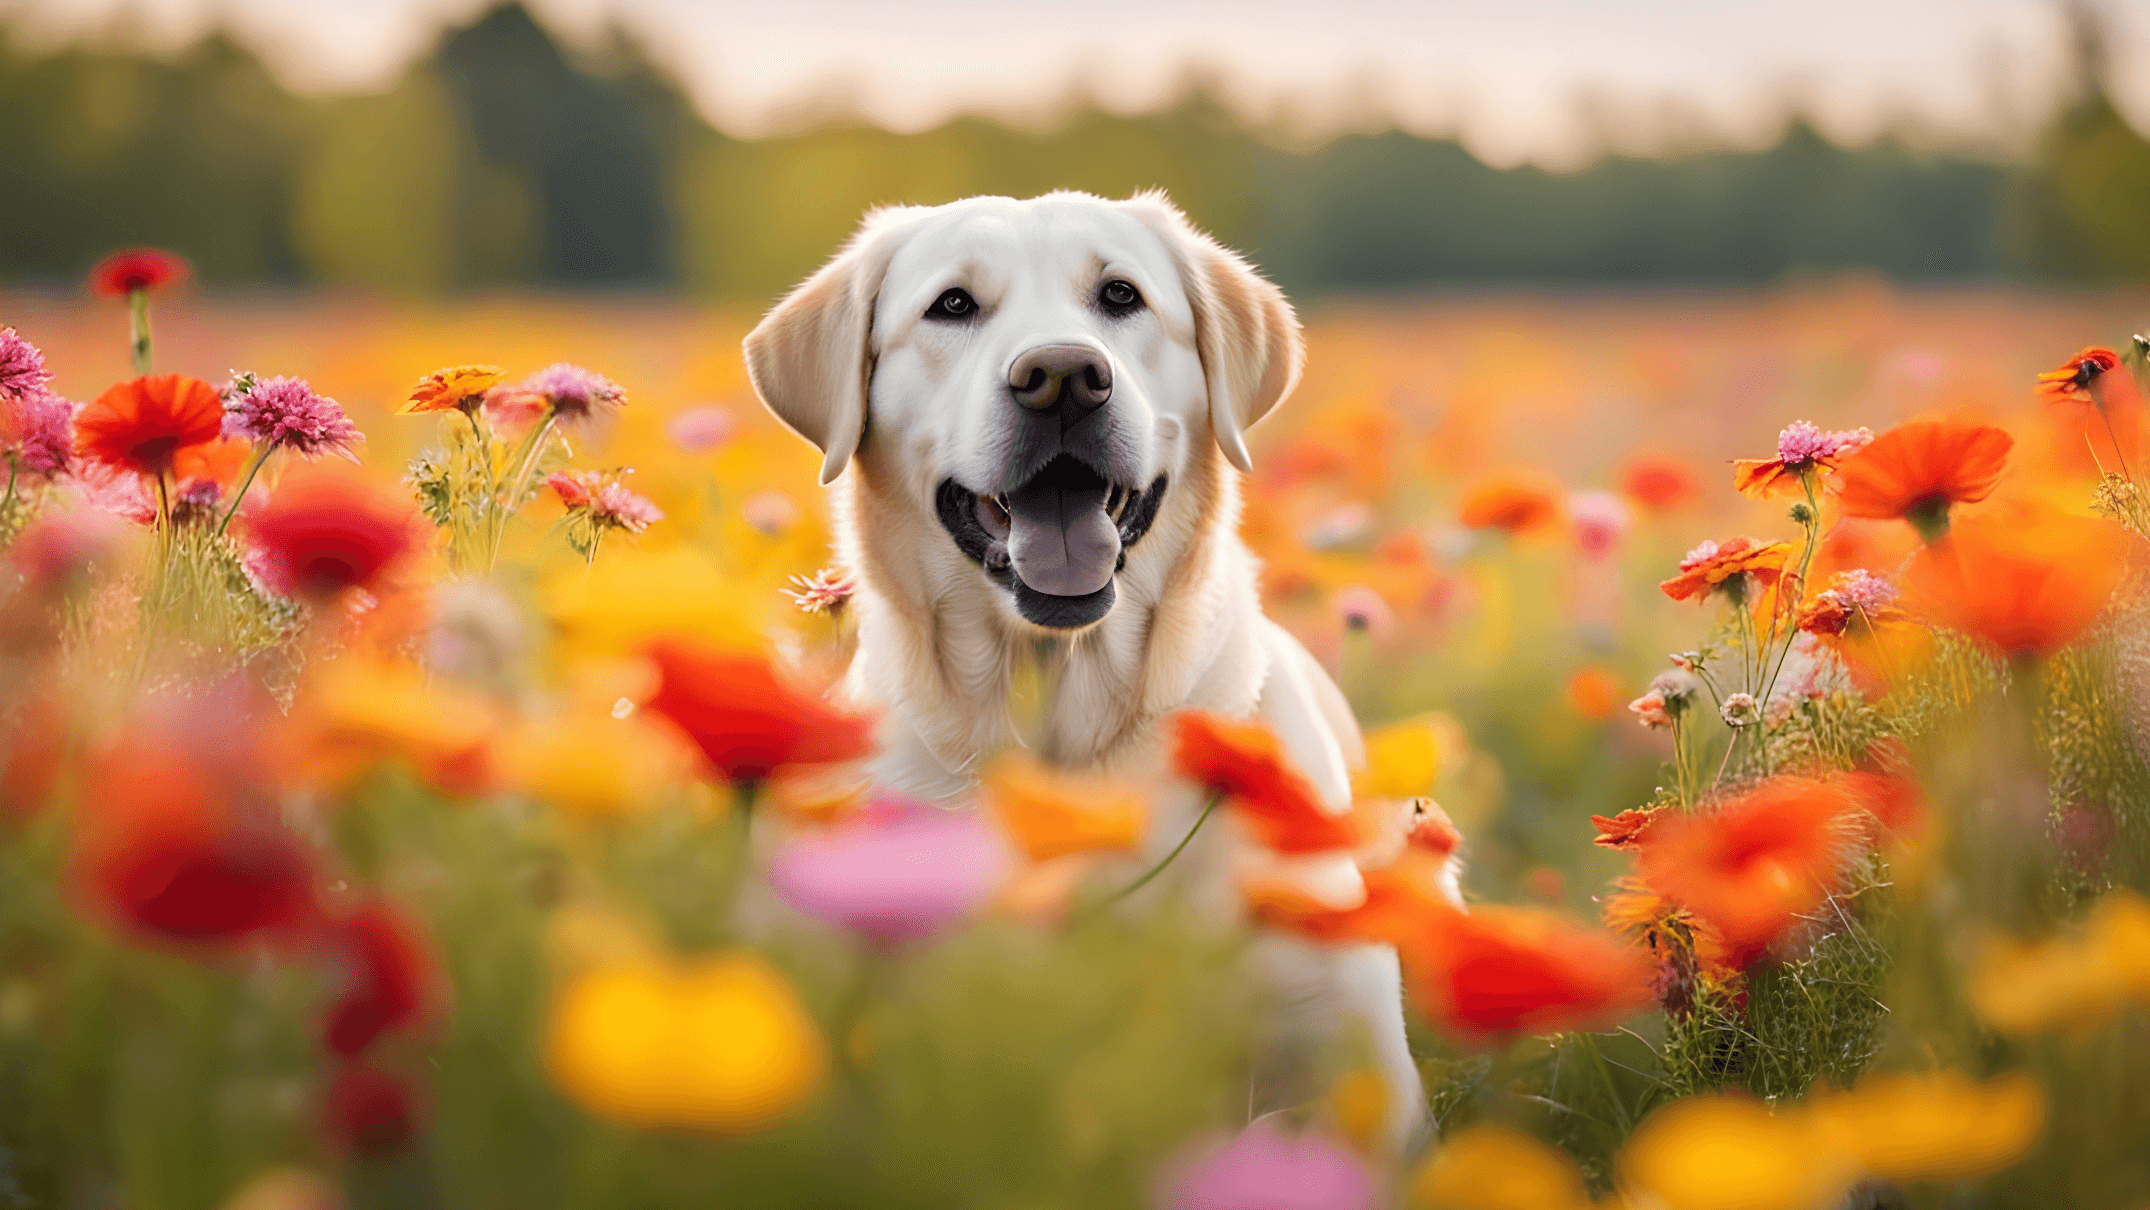 An adorable Labrador Retriever joyfully playing in a field of colorful flowers